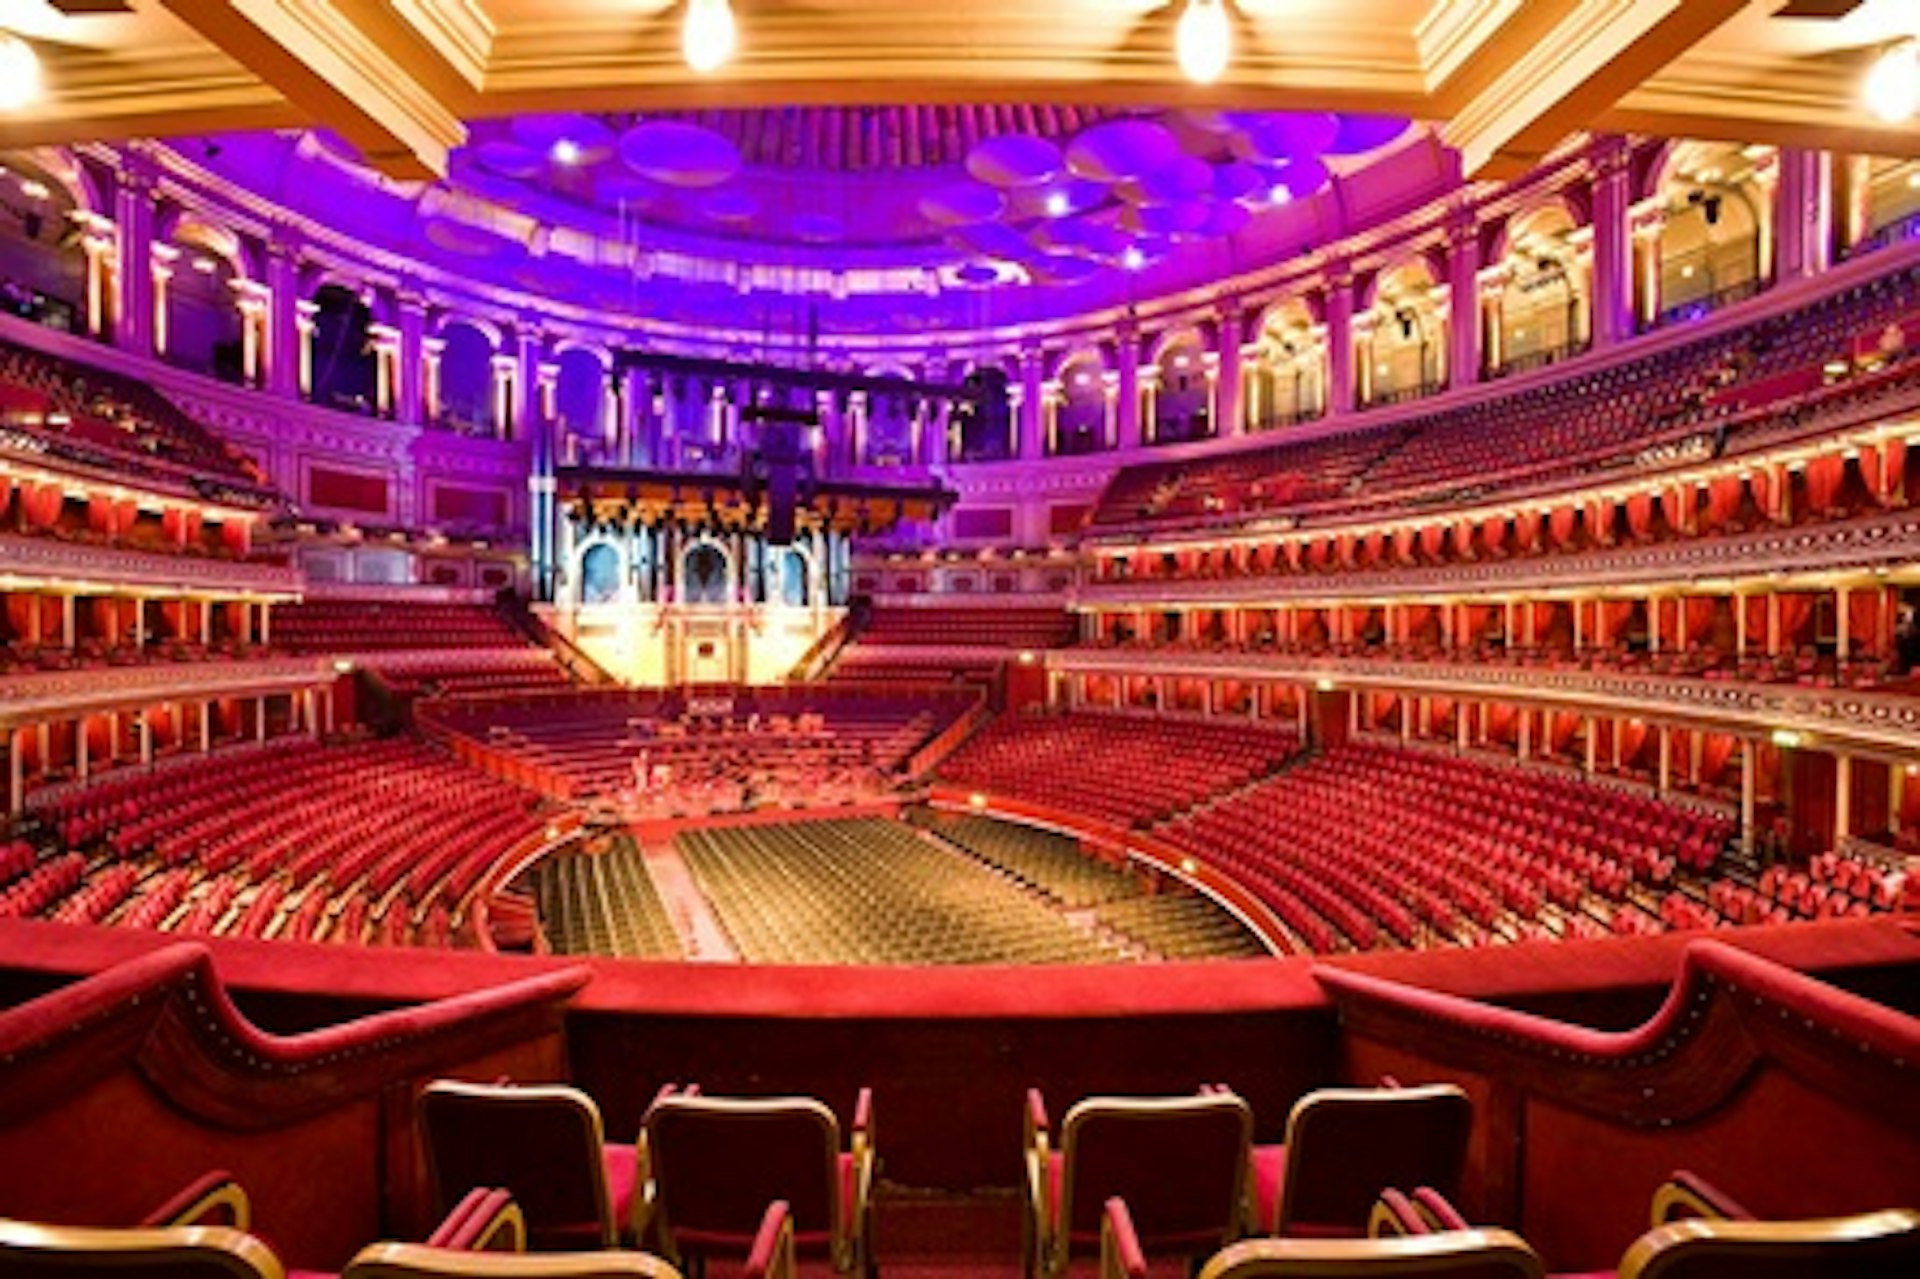 Afternoon Tea for Two at the Royal Albert Hall 2